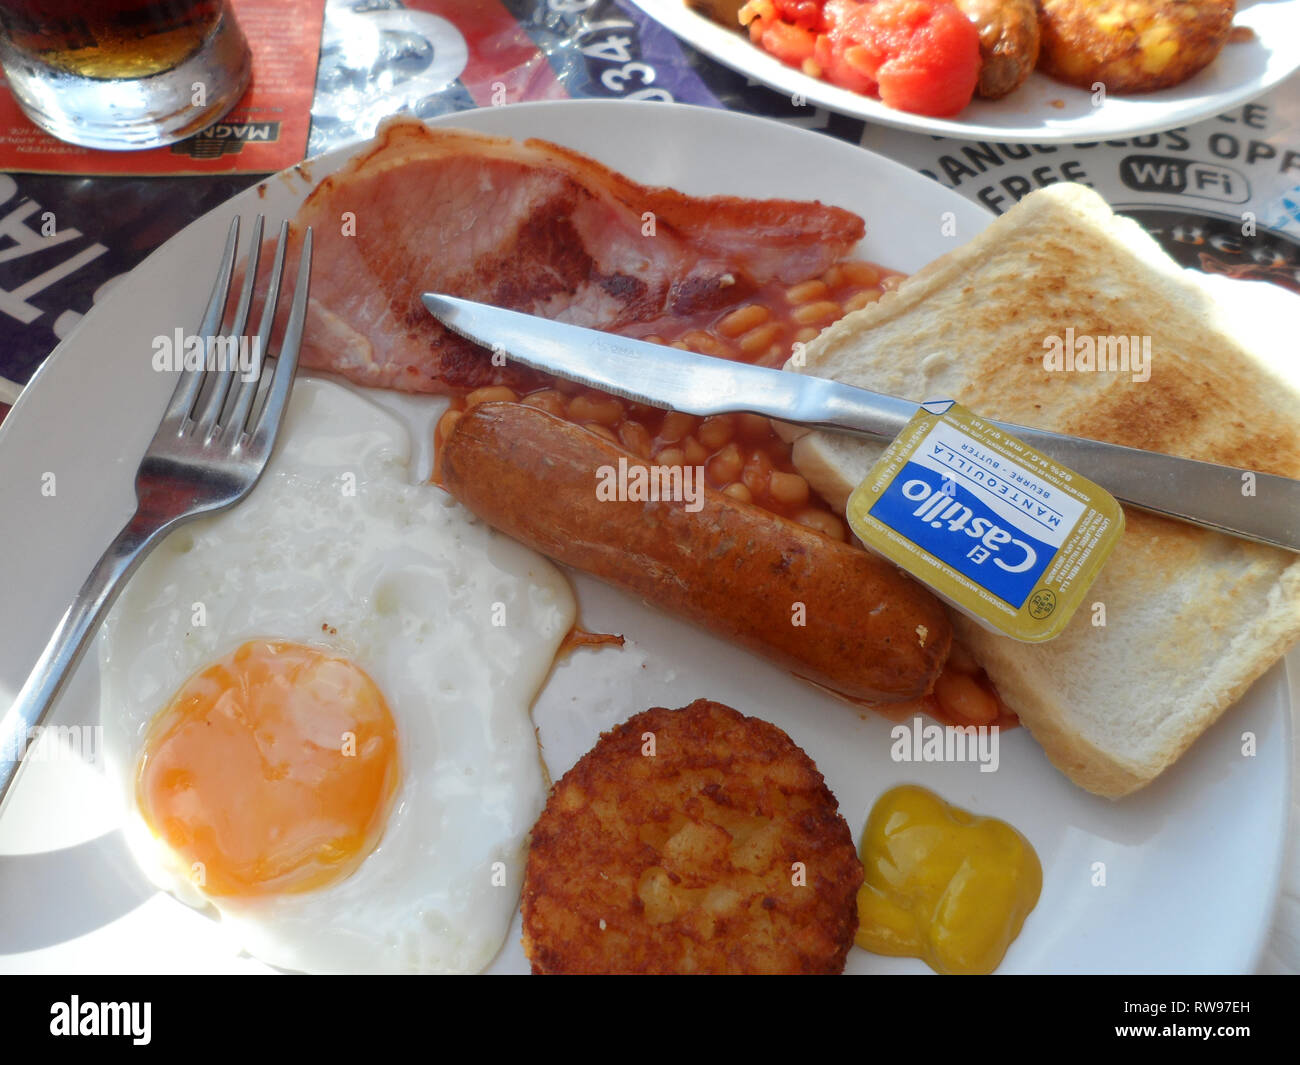 Full English breakfast served in a sports bar in Fuengirola, Costa del Sol, Spain. Stock Photo